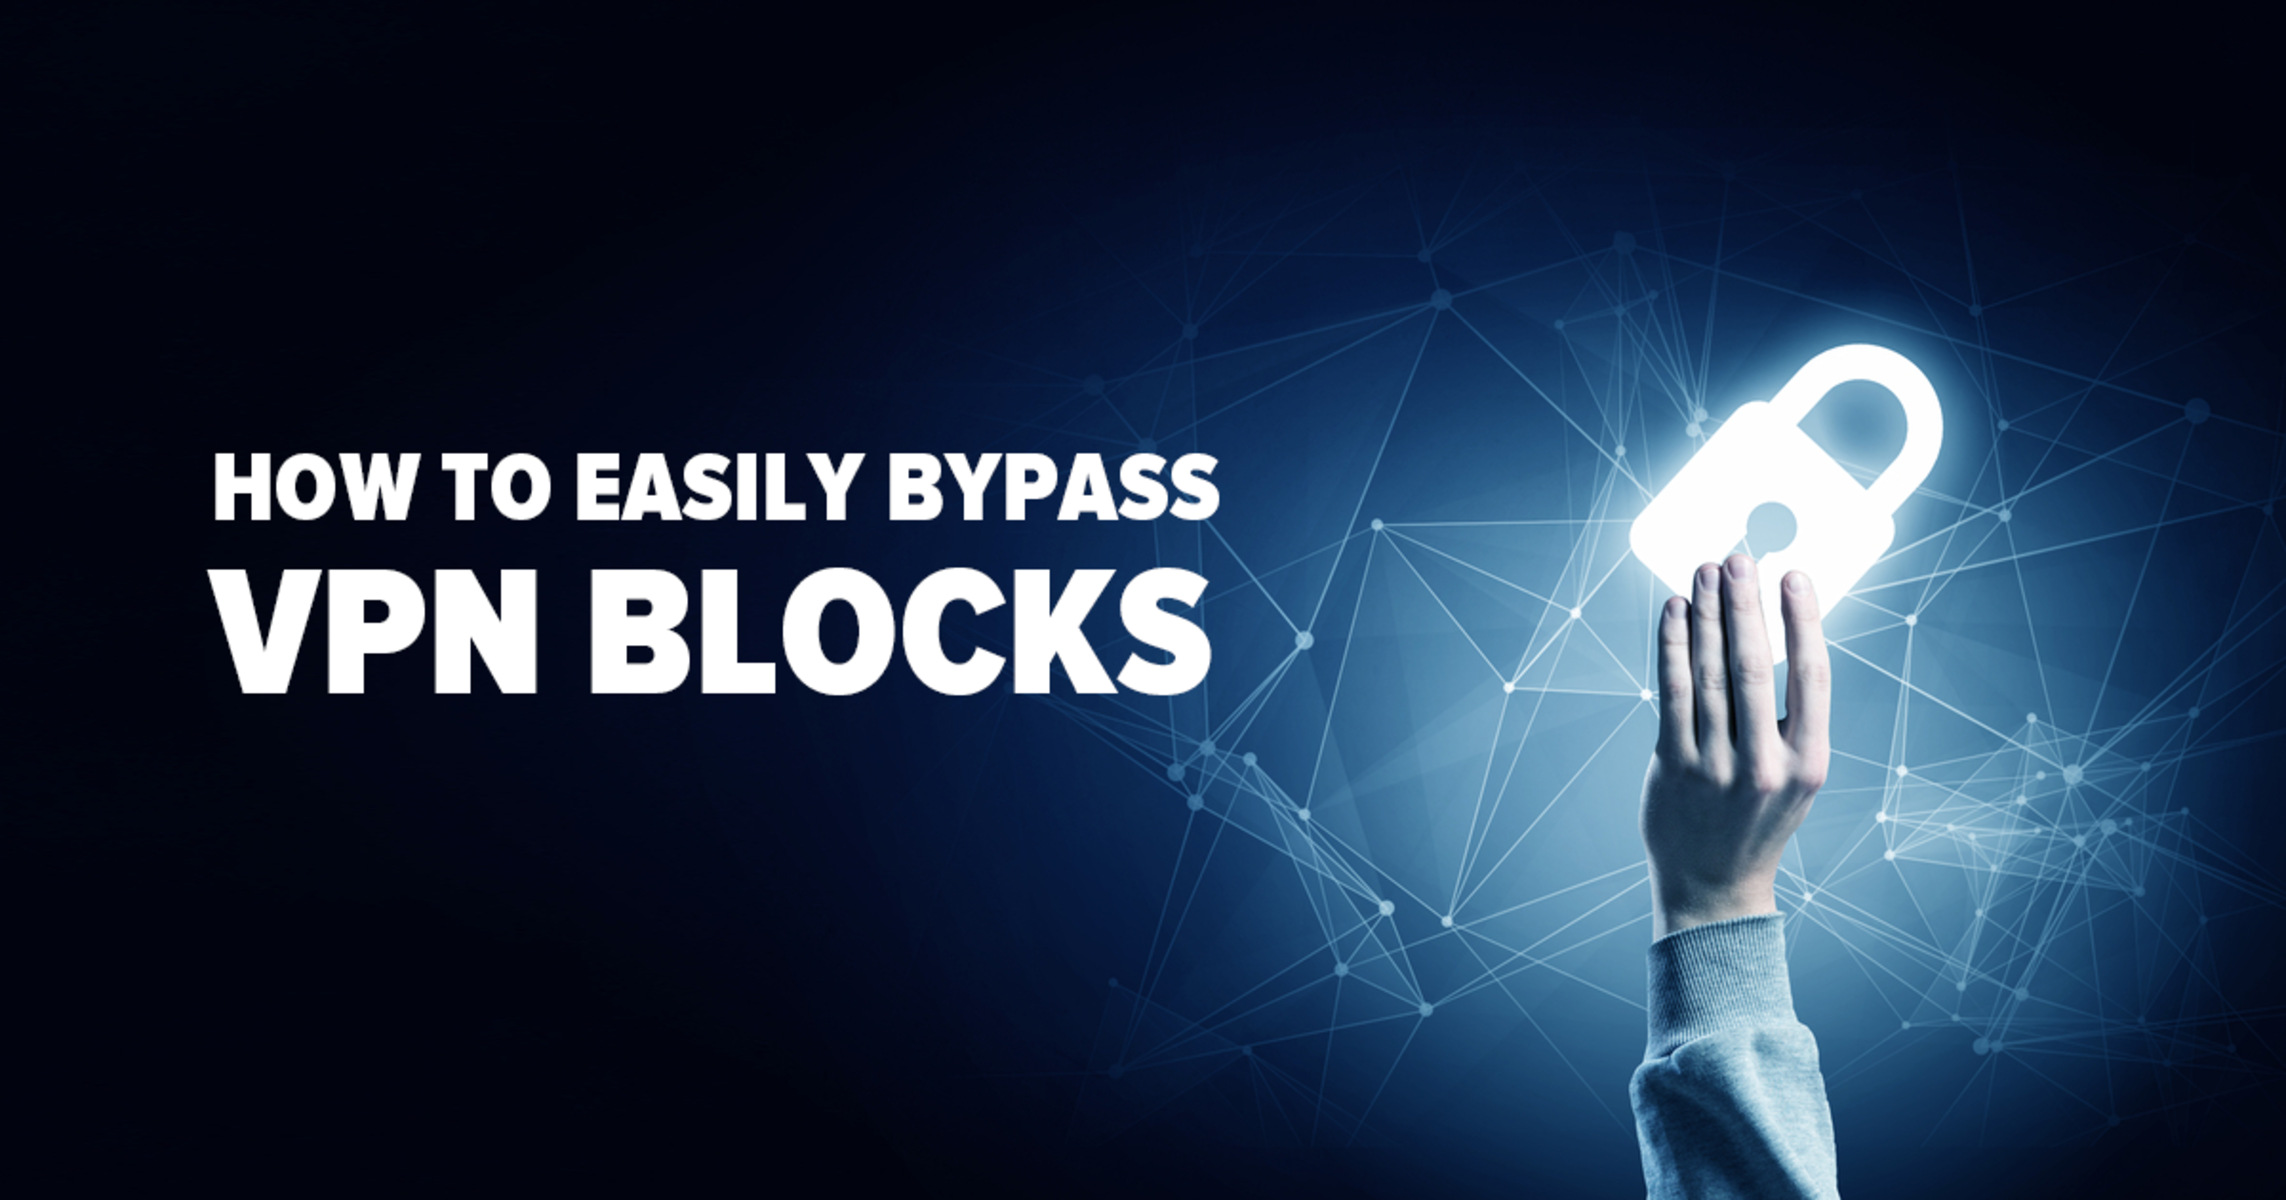 How To Bypass VPN Block